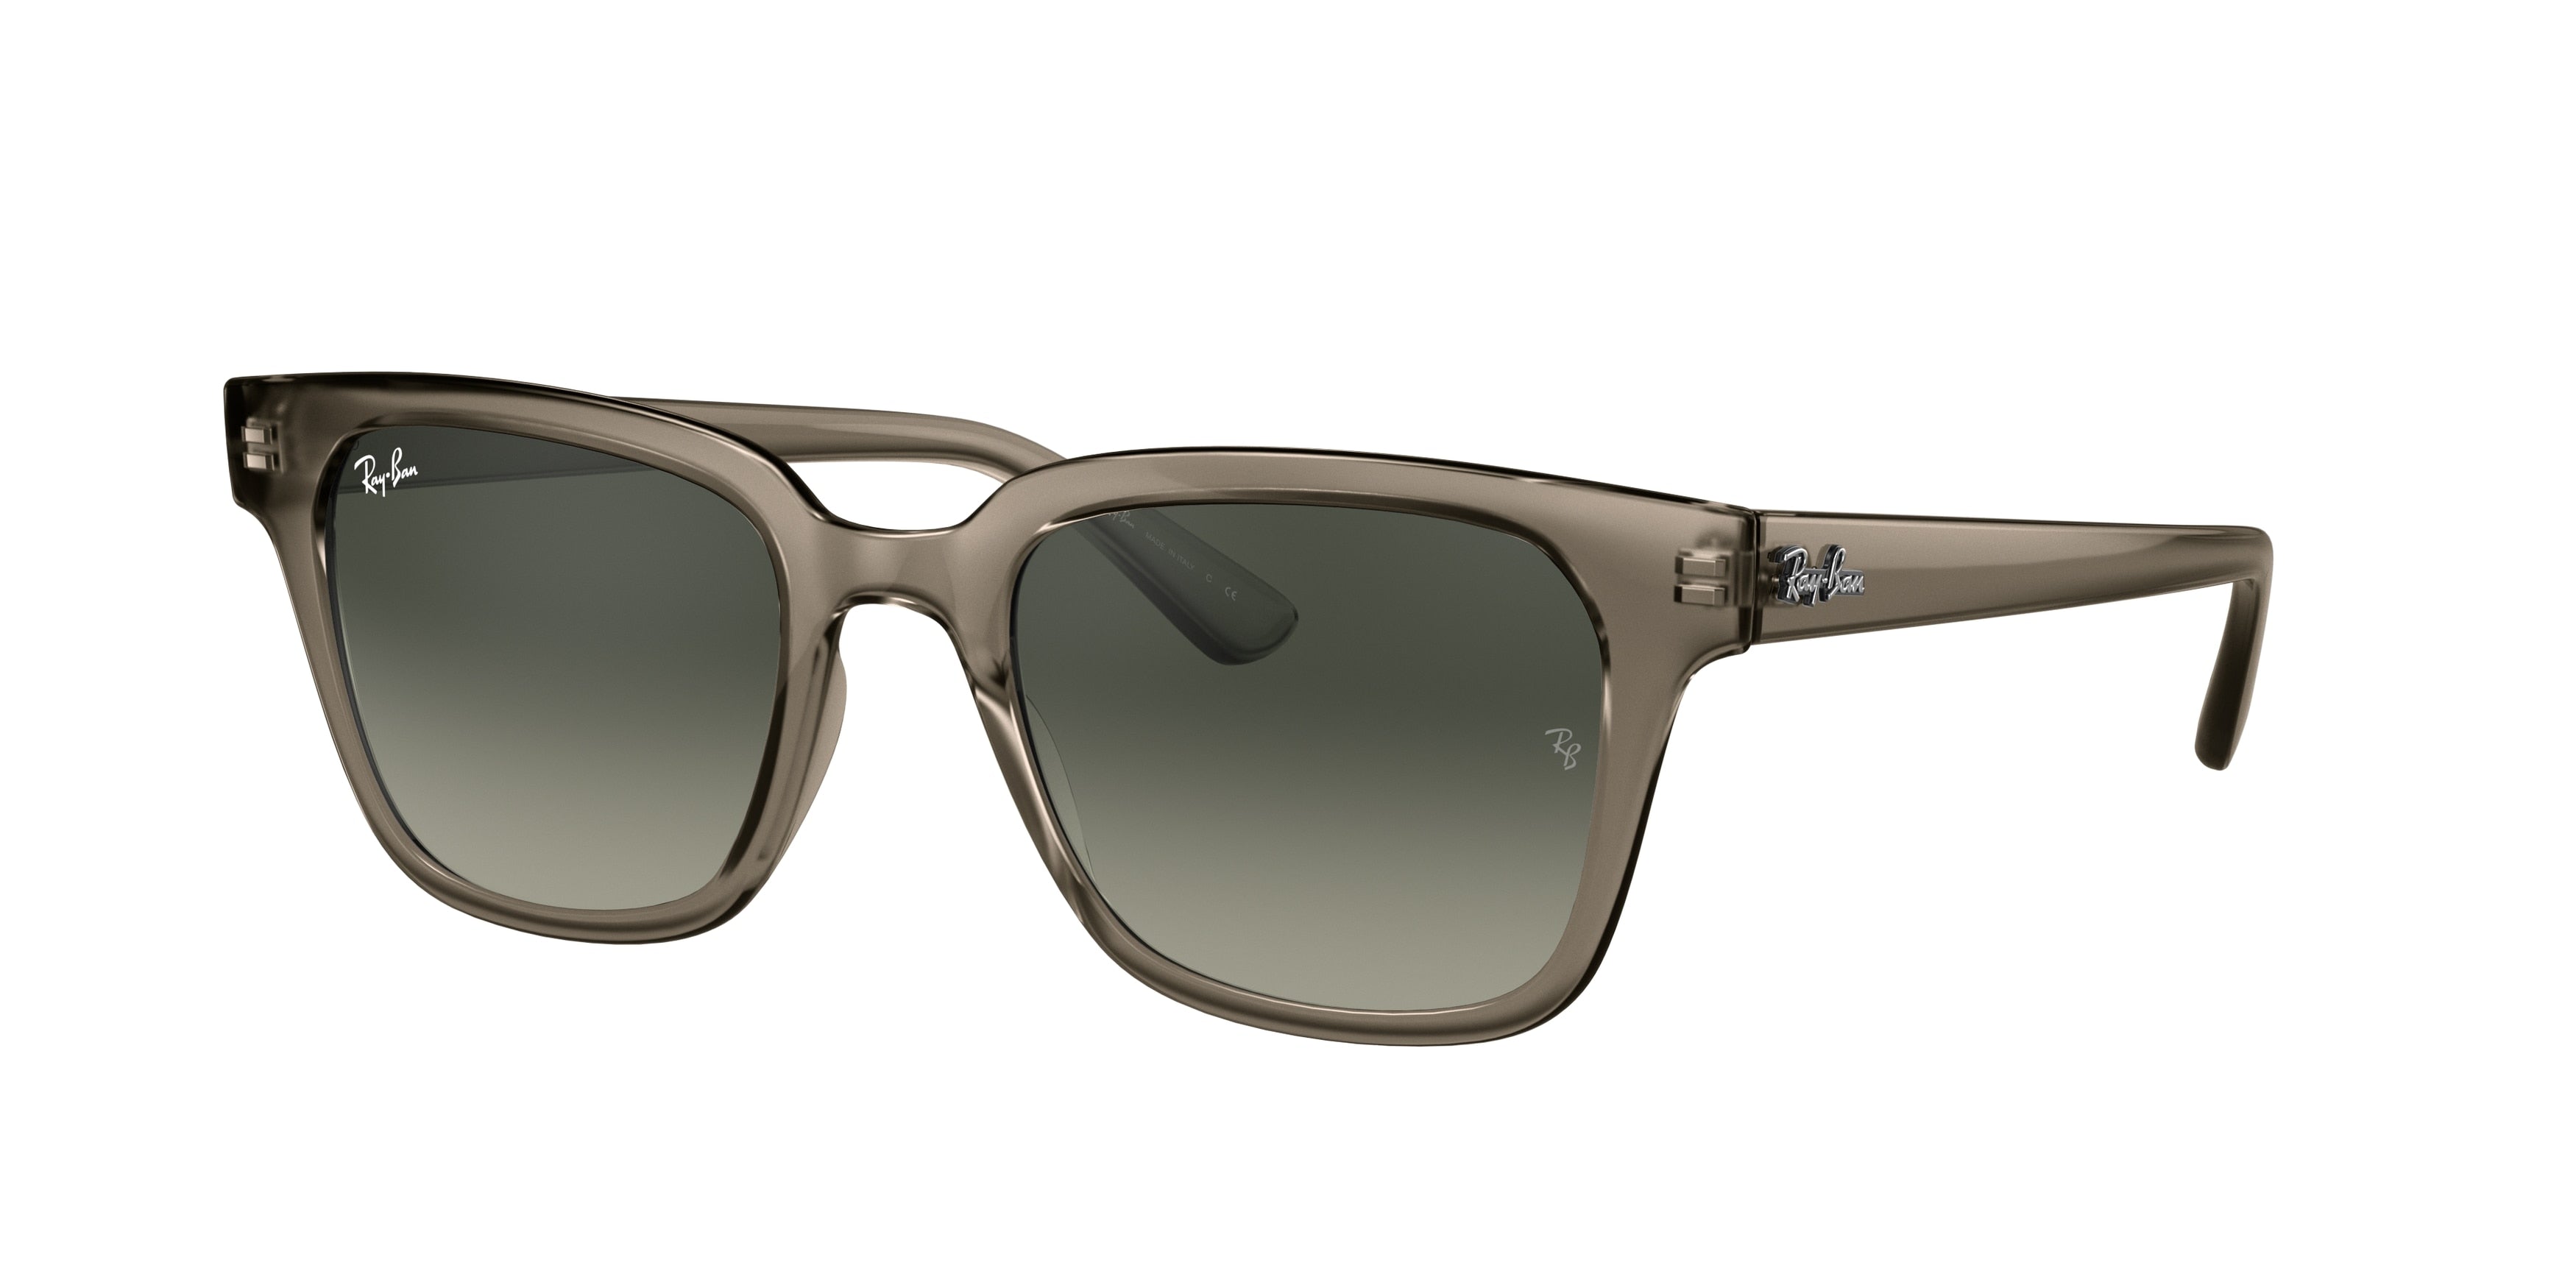 Ray-Ban RB4323 Square Sunglasses  644971-Transparent Grey 50-150-20 - Color Map Grey